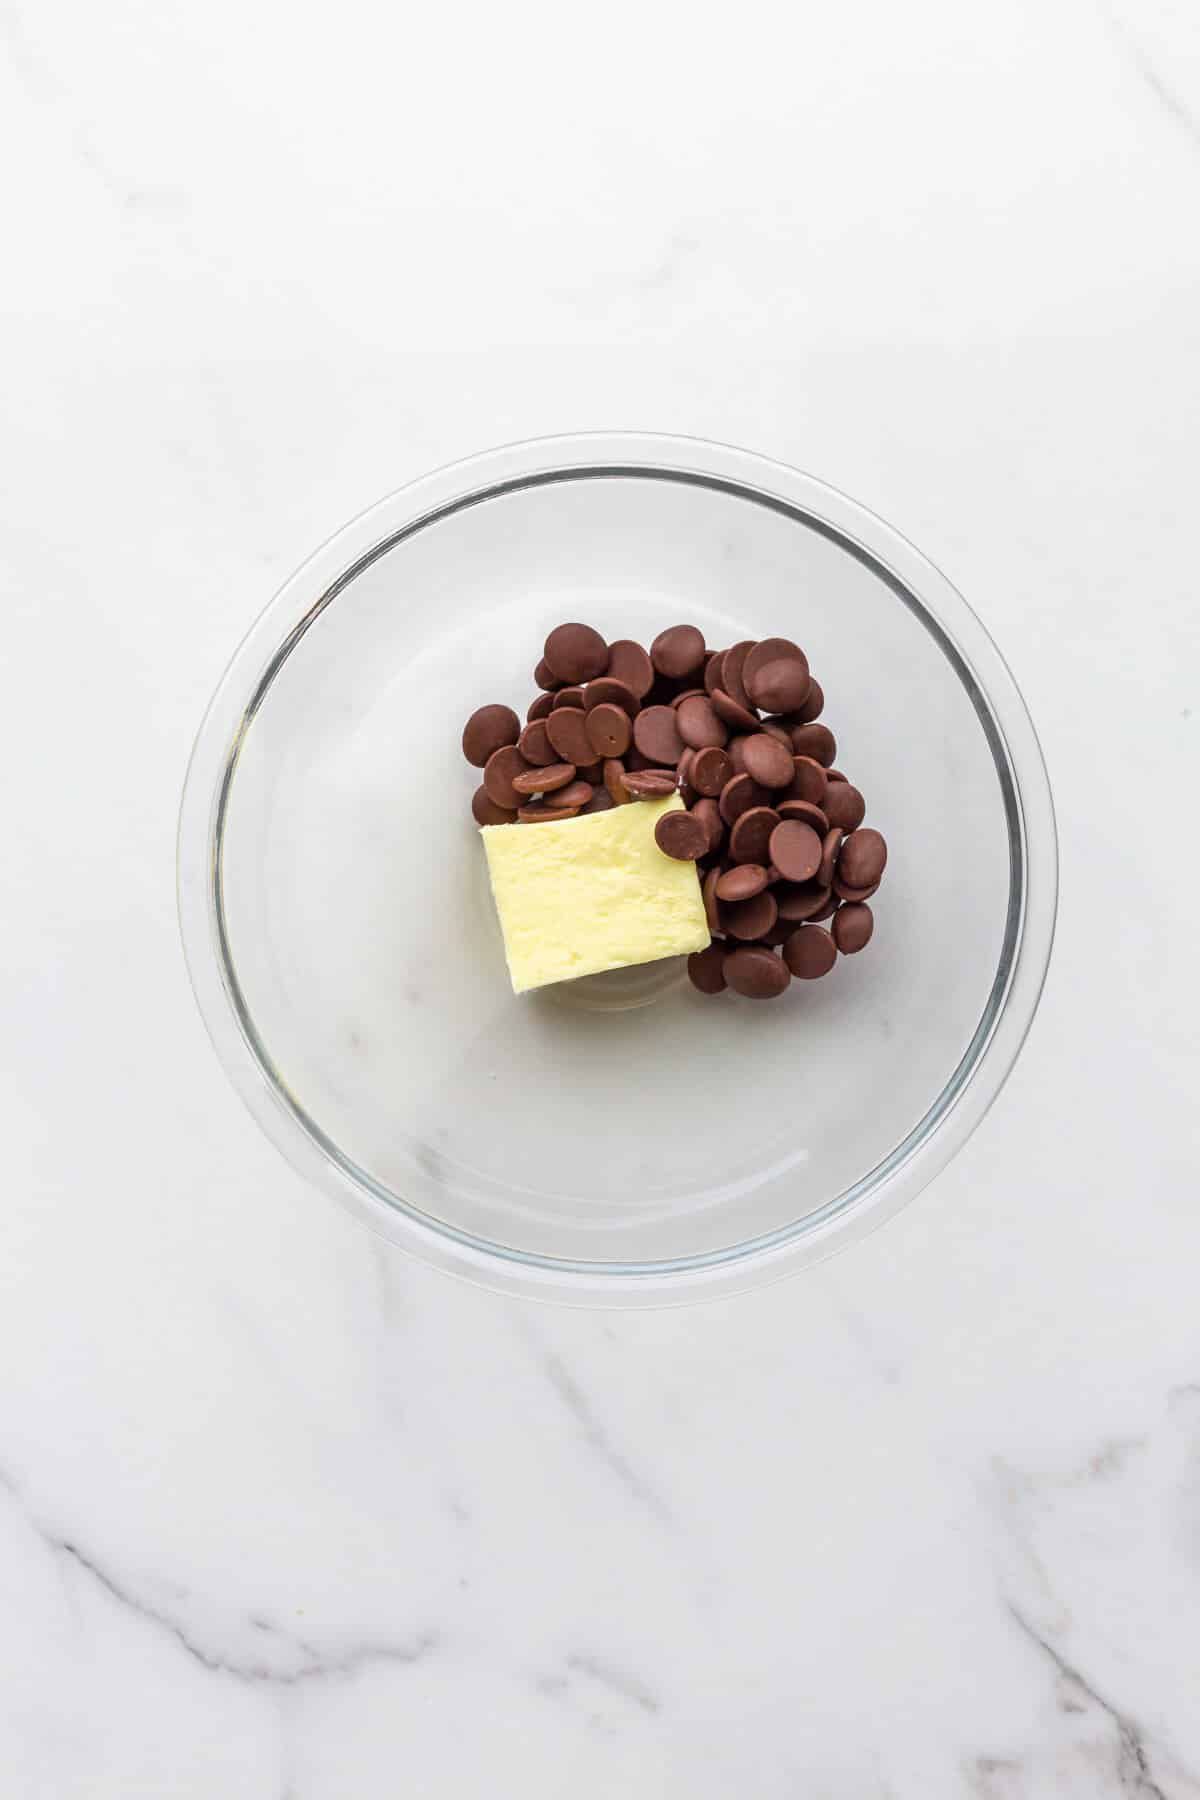 A glass bowl with chocolate and butter to be melted together to make chocolate frosting.